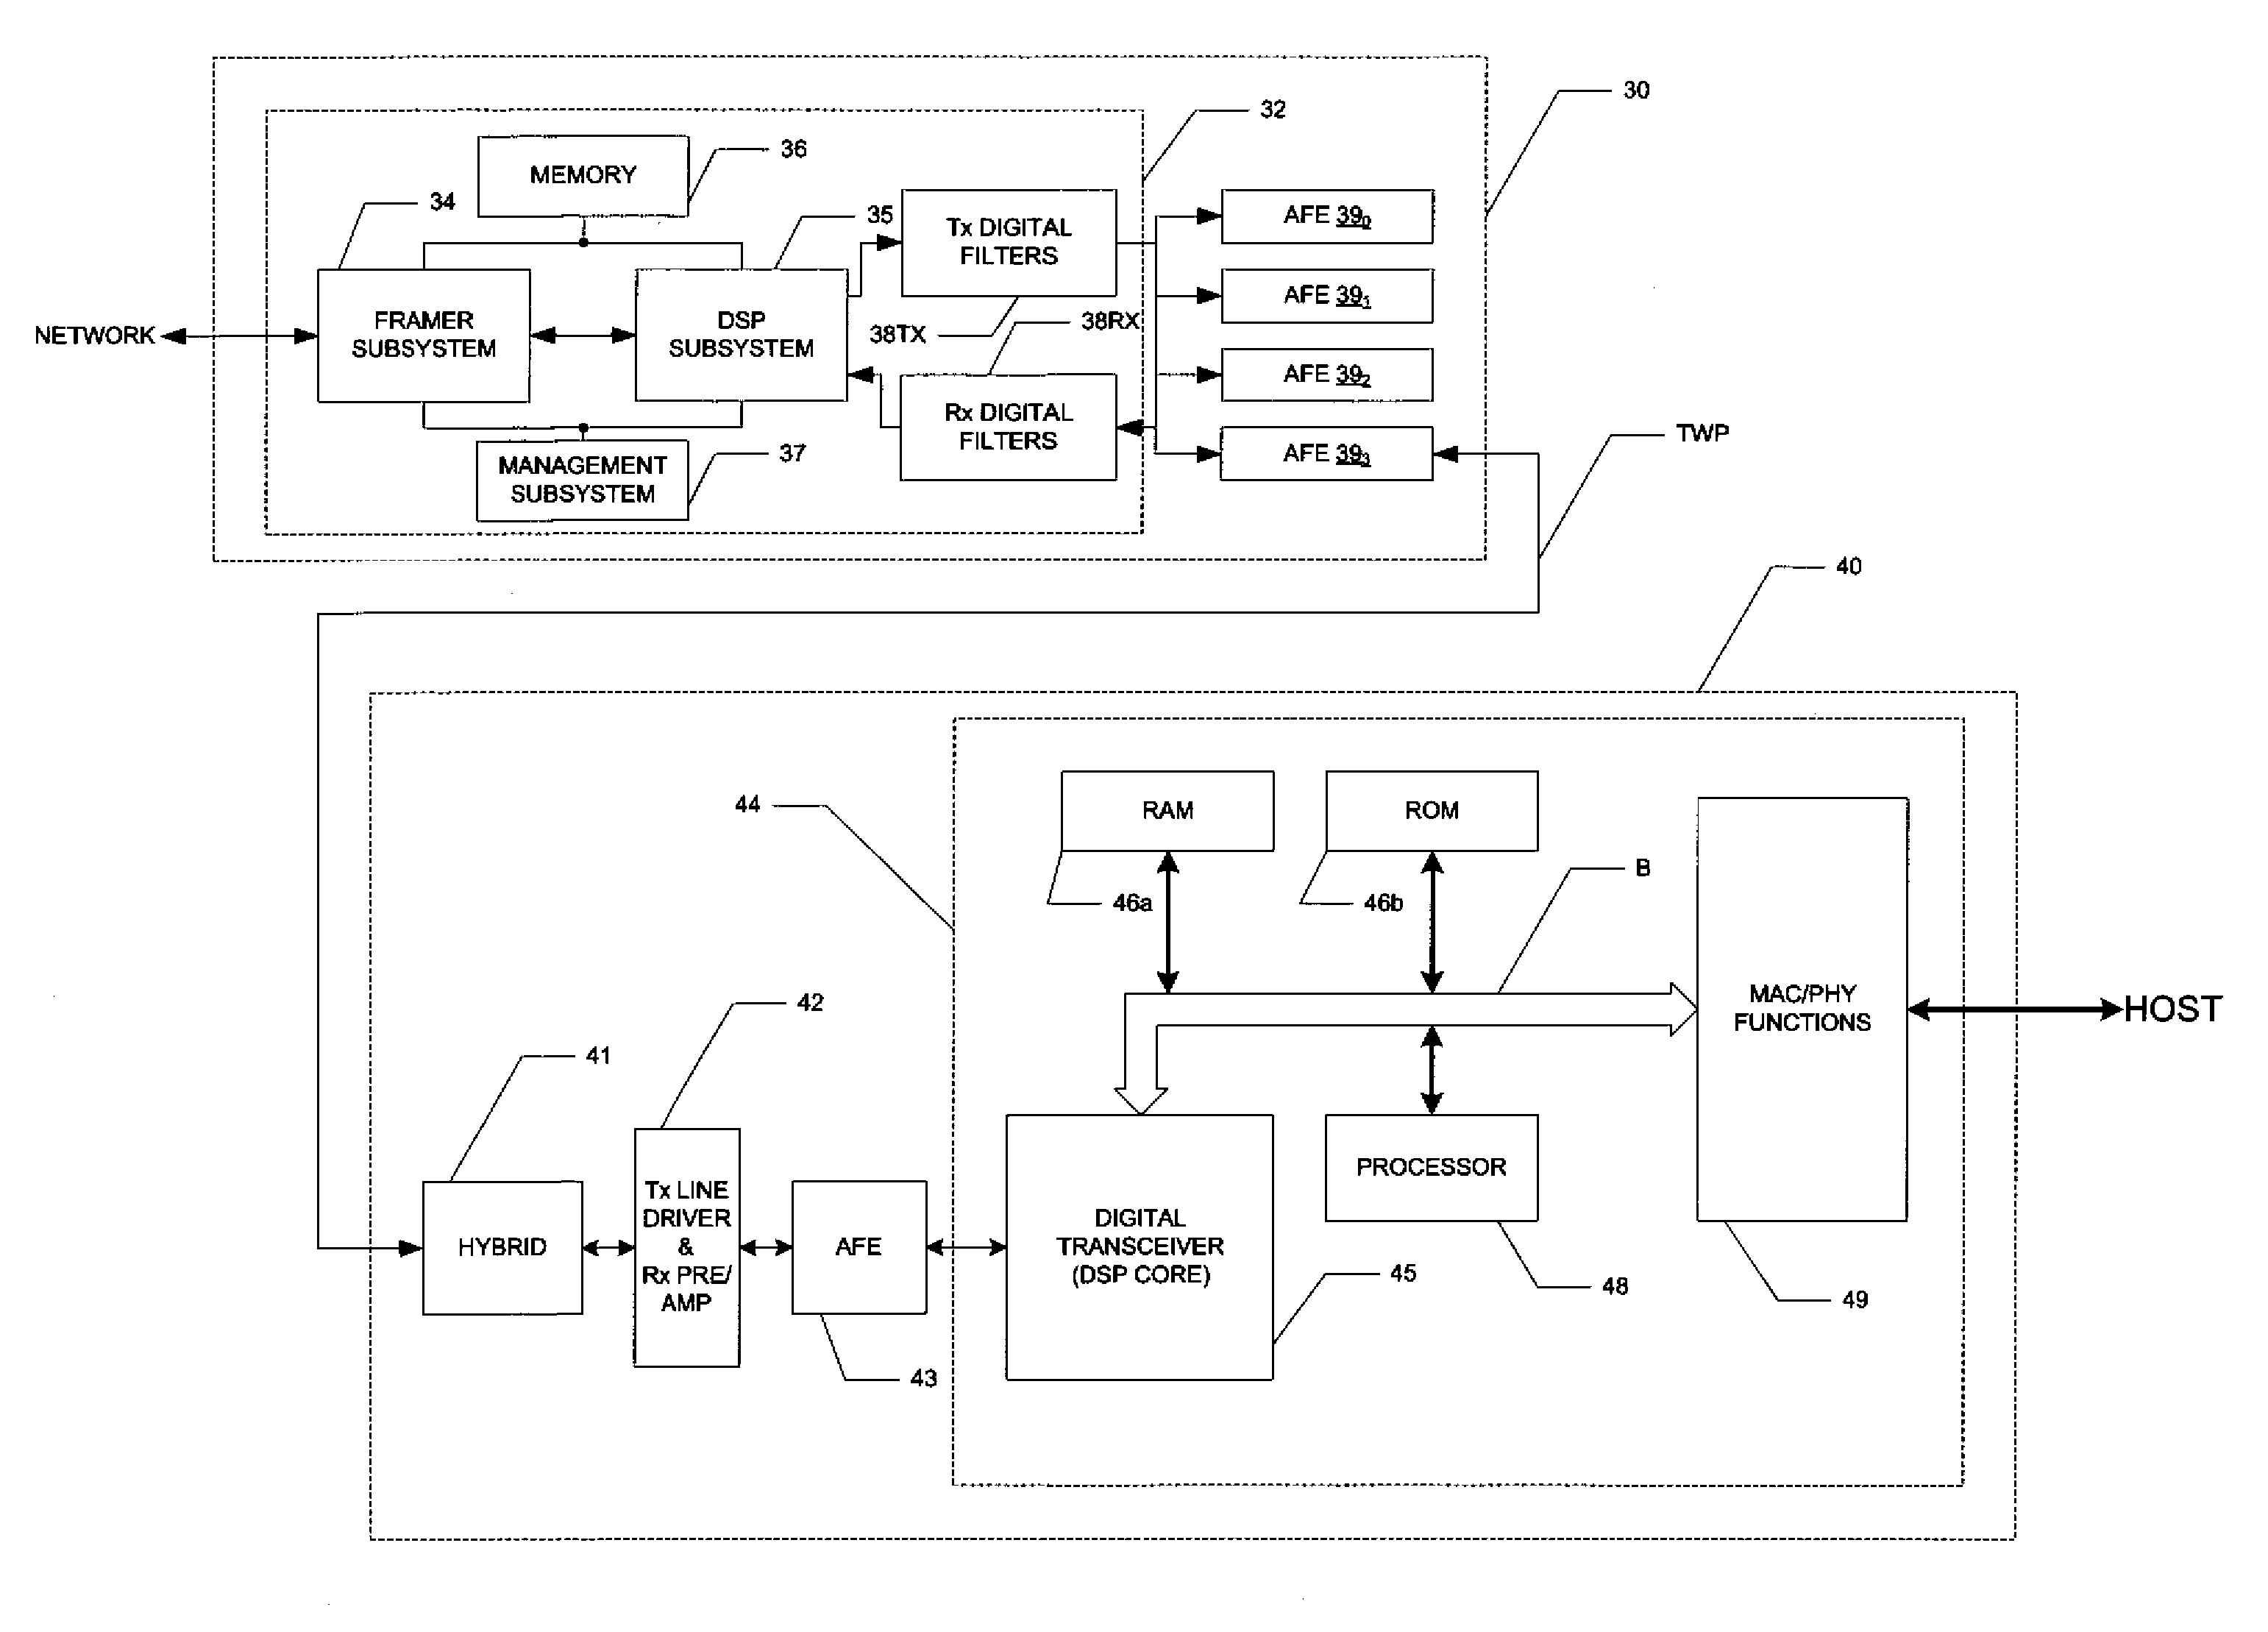 Optimized Short Initialization After Low Power Mode for Digital Subscriber Line Communications